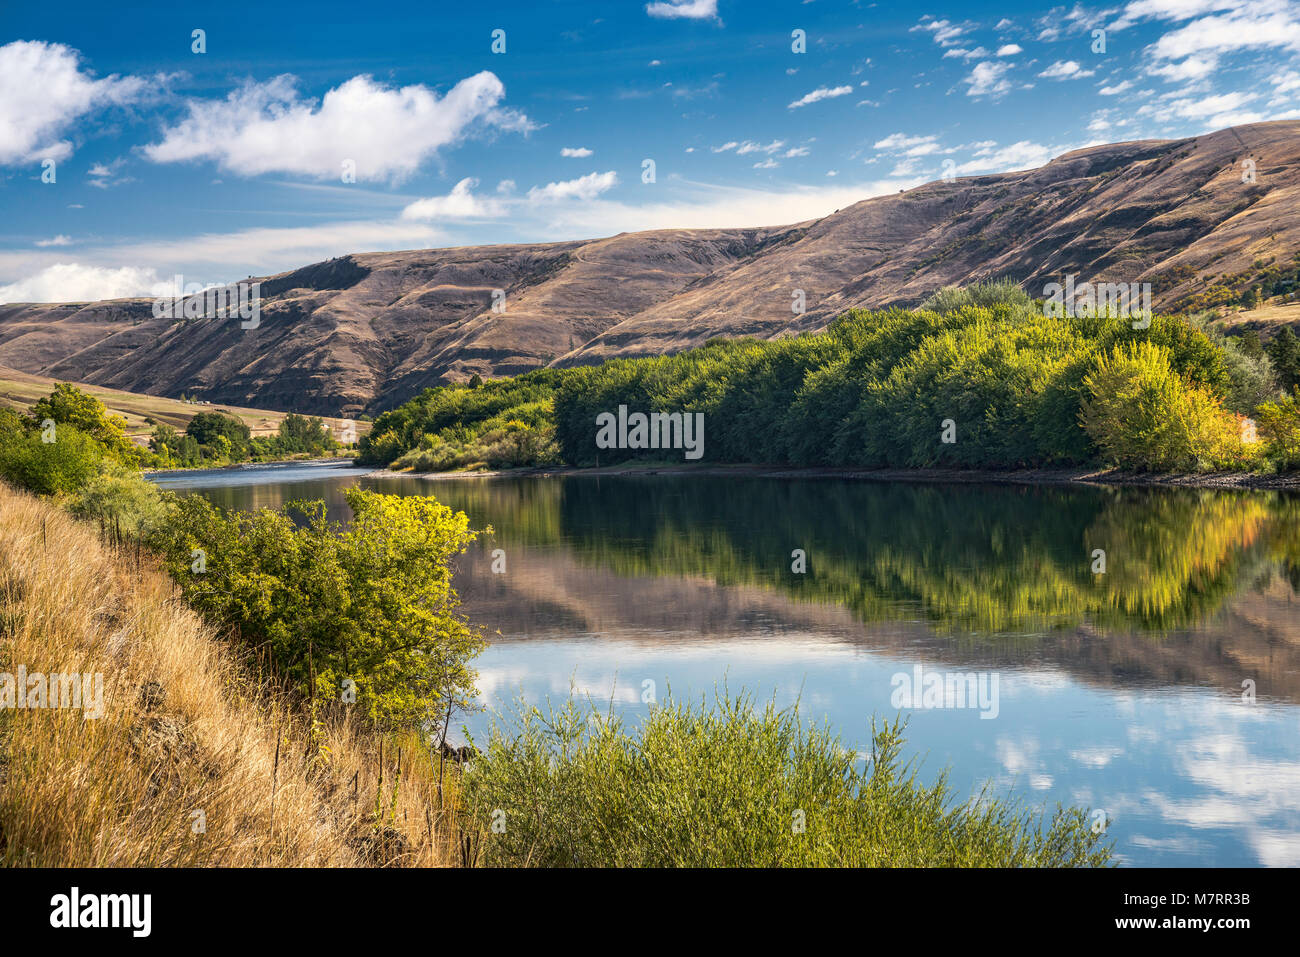 Clearwater River Canyon, Northwest Passage Scenic Byway, Nez Perce Trail, Nez Perce Indian Reservation, near Spalding, Idaho, USA Stock Photo